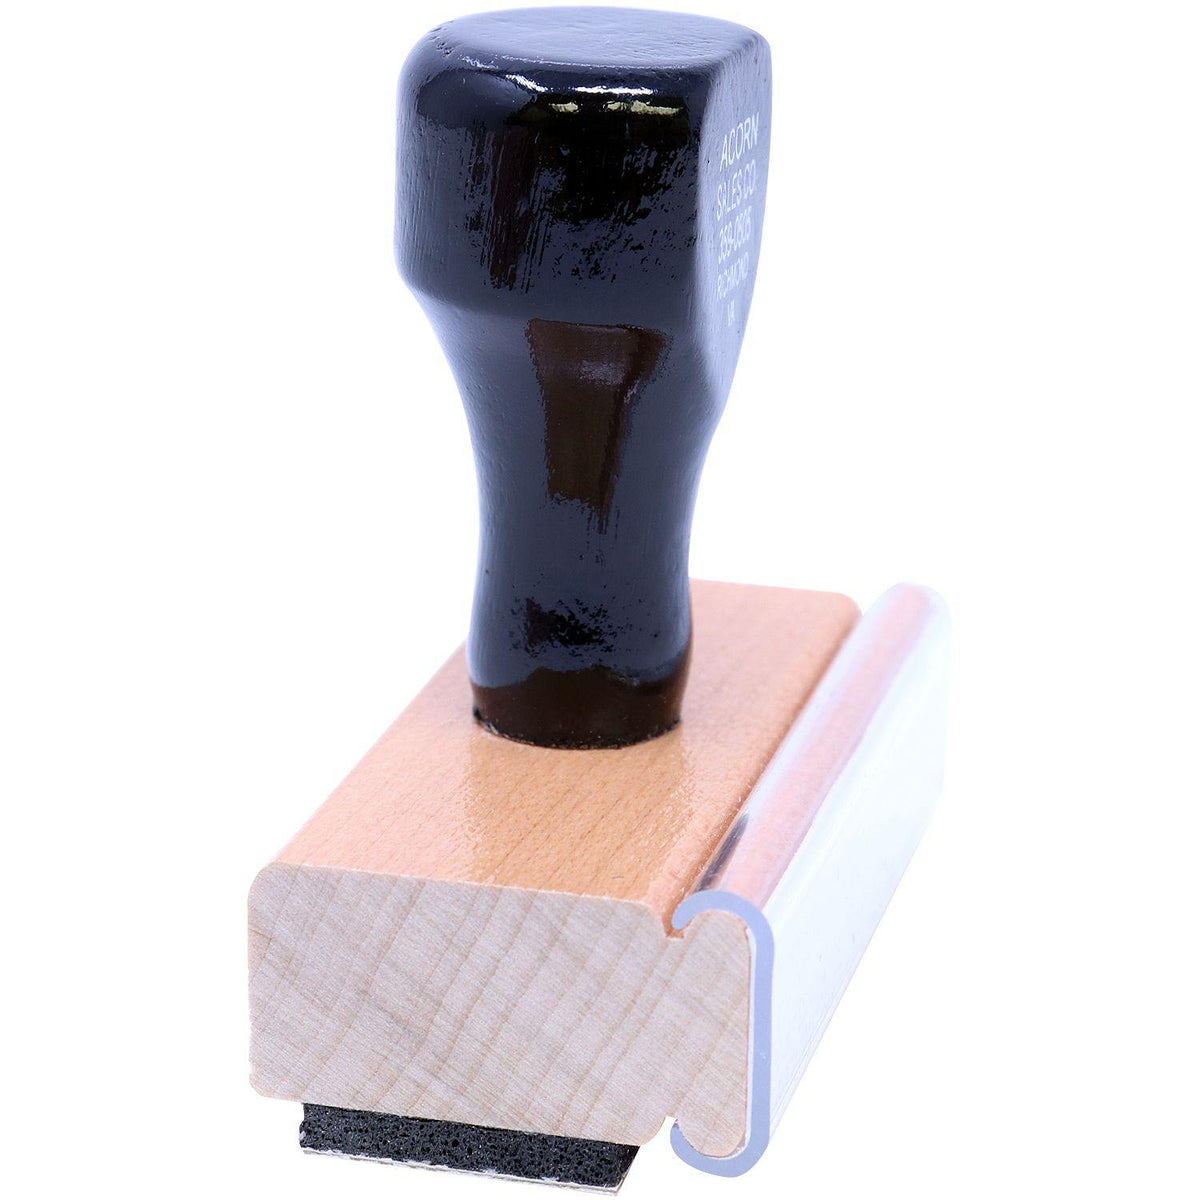 Side View of Good Thinking Rubber Stamp at an Angle